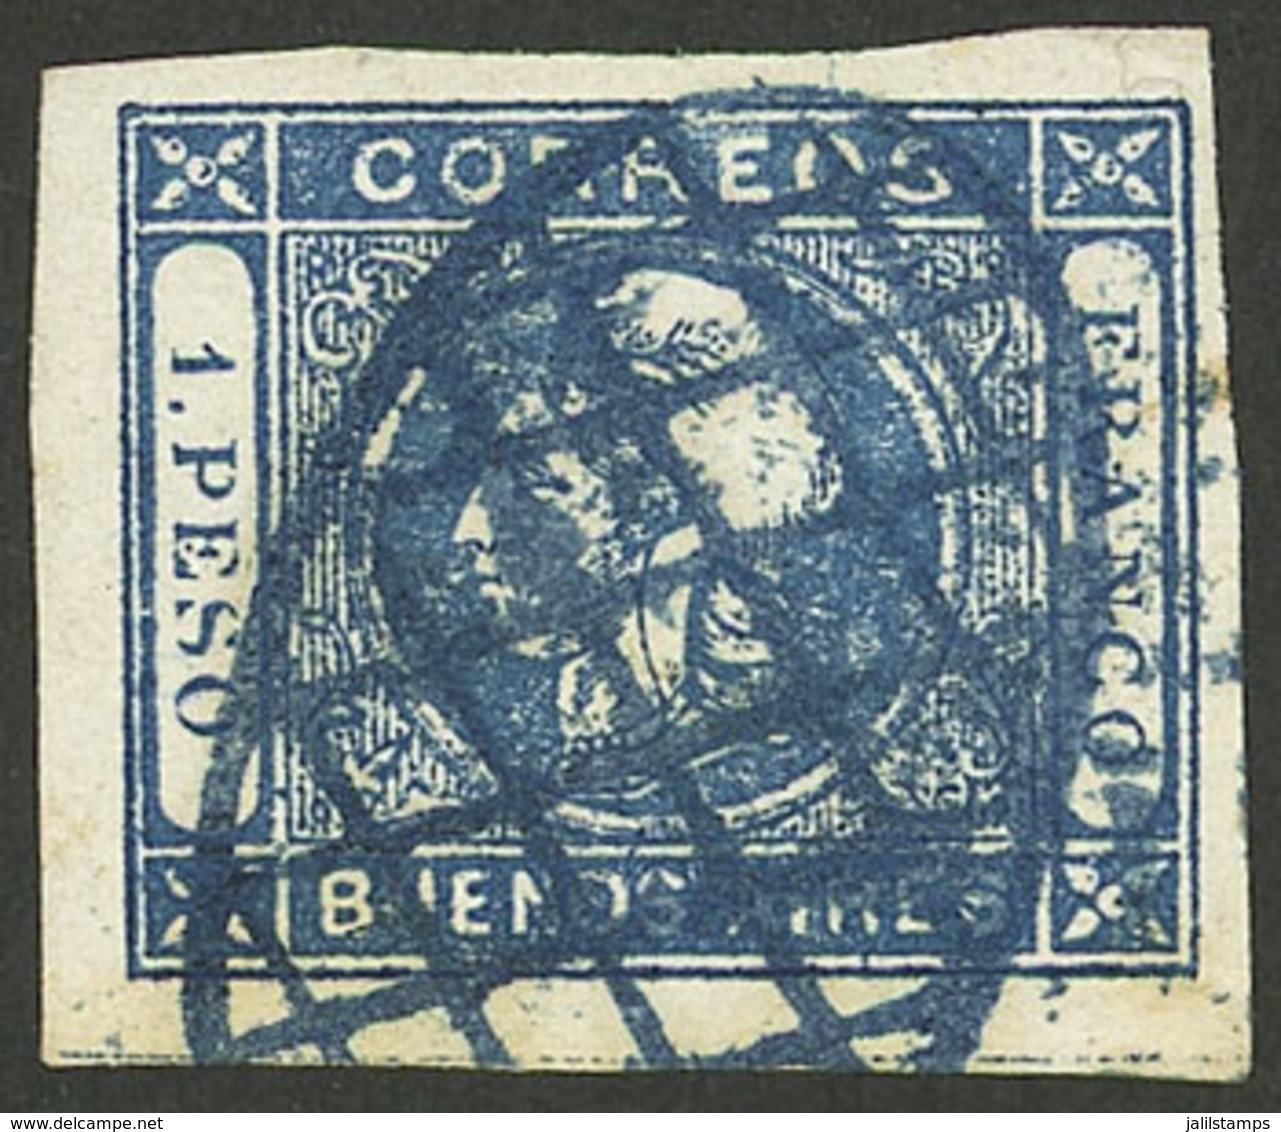 ARGENTINA: GJ.17, 1P. Blue, Dull Impression, Used With Mute Blue Grid Cancel, Very Nice, VF Quality - Buenos Aires (1858-1864)